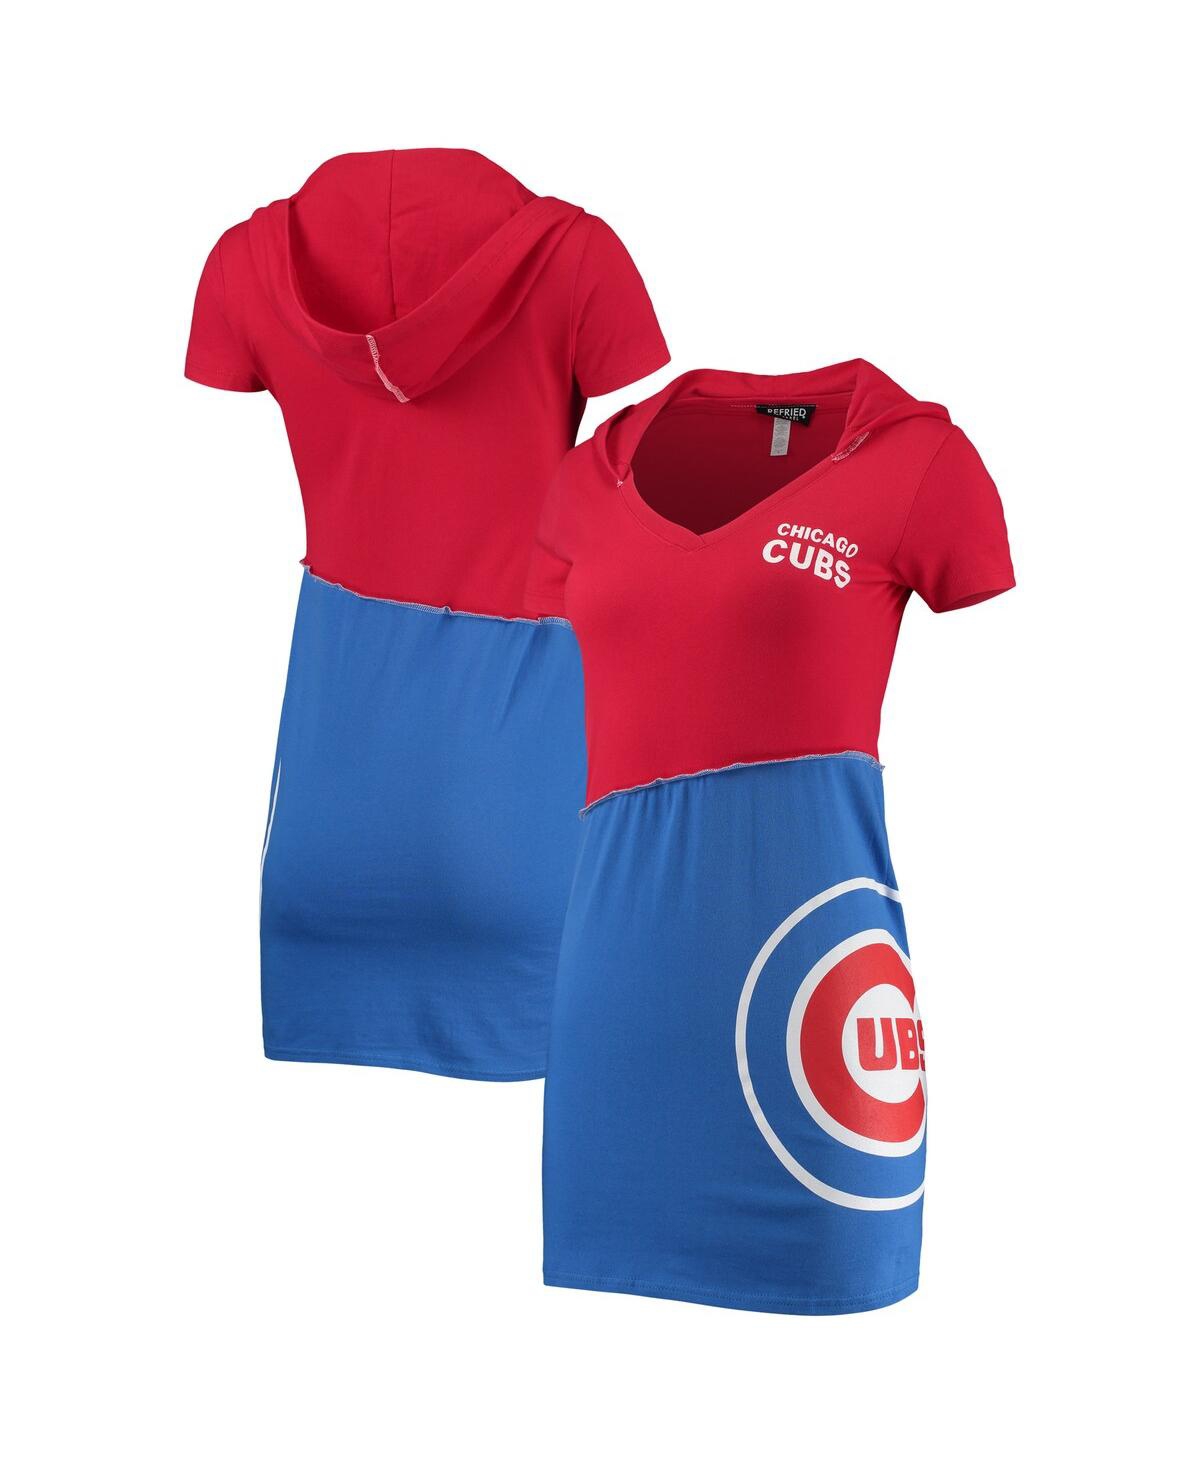 Women's Refried Apparel Red and Royal Chicago Cubs Hoodie Dress - Red, Royal